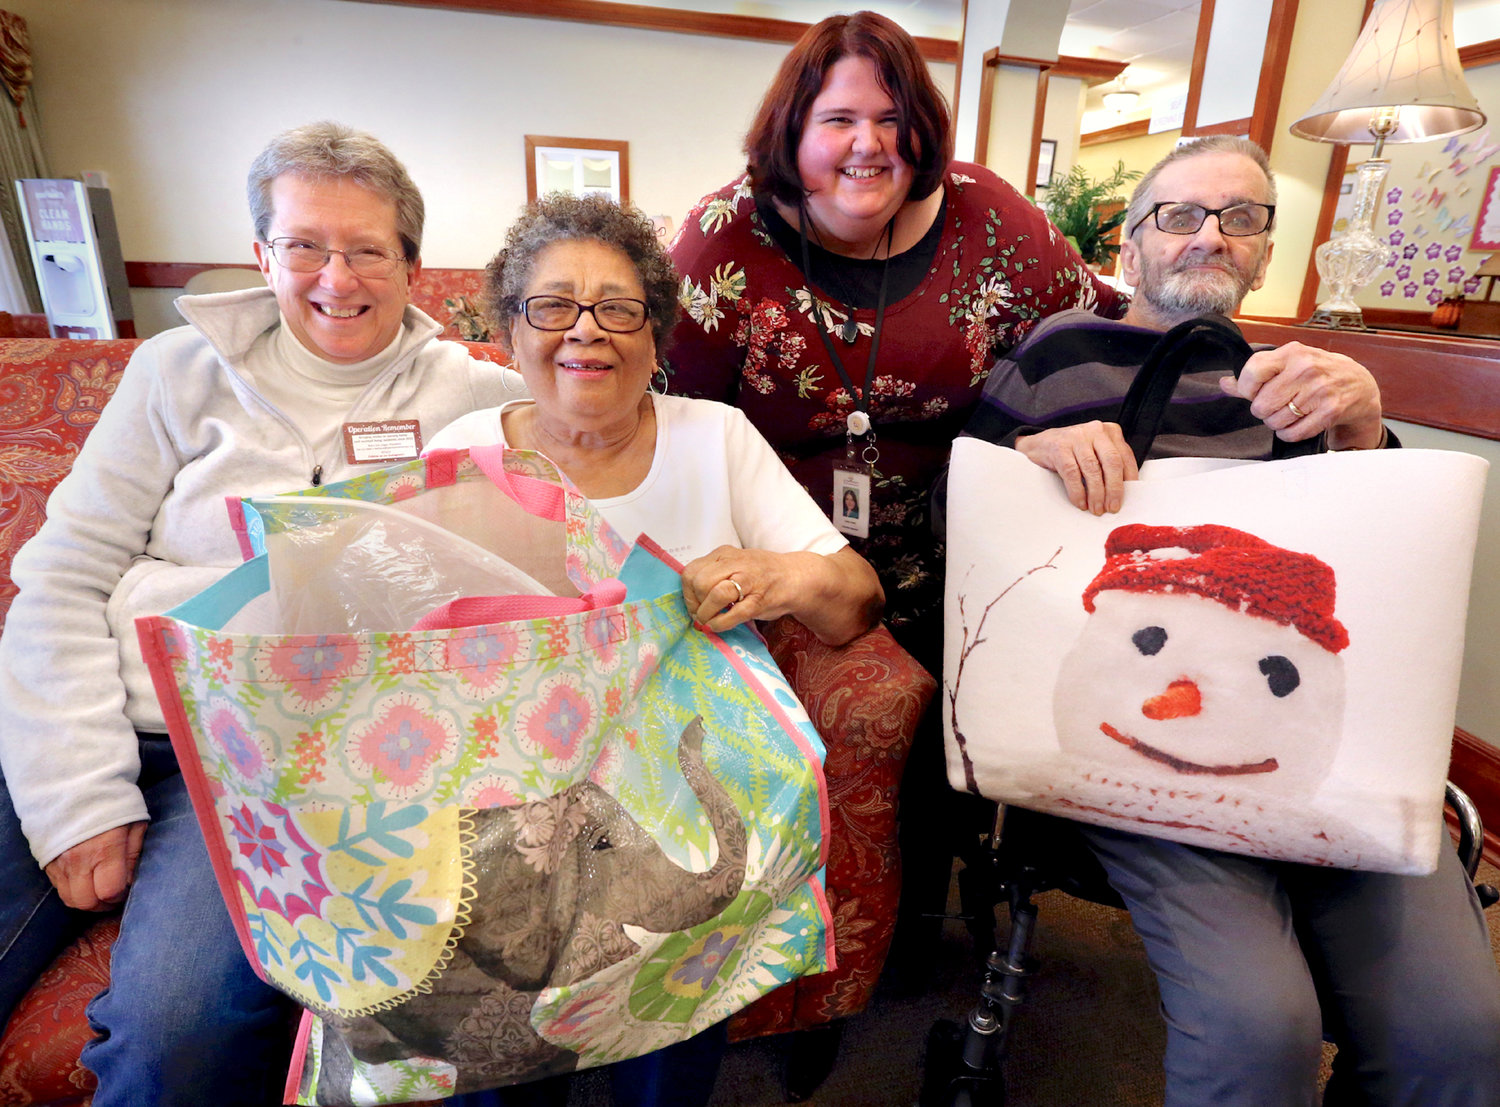 Betty Sue Unger, left, started Operation Remember 10 years ago at Evergreen Health &amp; Rehab Center in Winchester, Va., to bring a little holiday cheer to the facility’s residents, pictured on Oct. 19, are resident Helen Walker, from left, Activities Assistant Caitlin Peele and resident Buzzy Braithwaite. “It was supposed to be a one-time thing,” she said. Since then, the group has grown into a full-fledged nonprofit that delivers Christmas presents and other gifts year-round to seven area nursing homes.